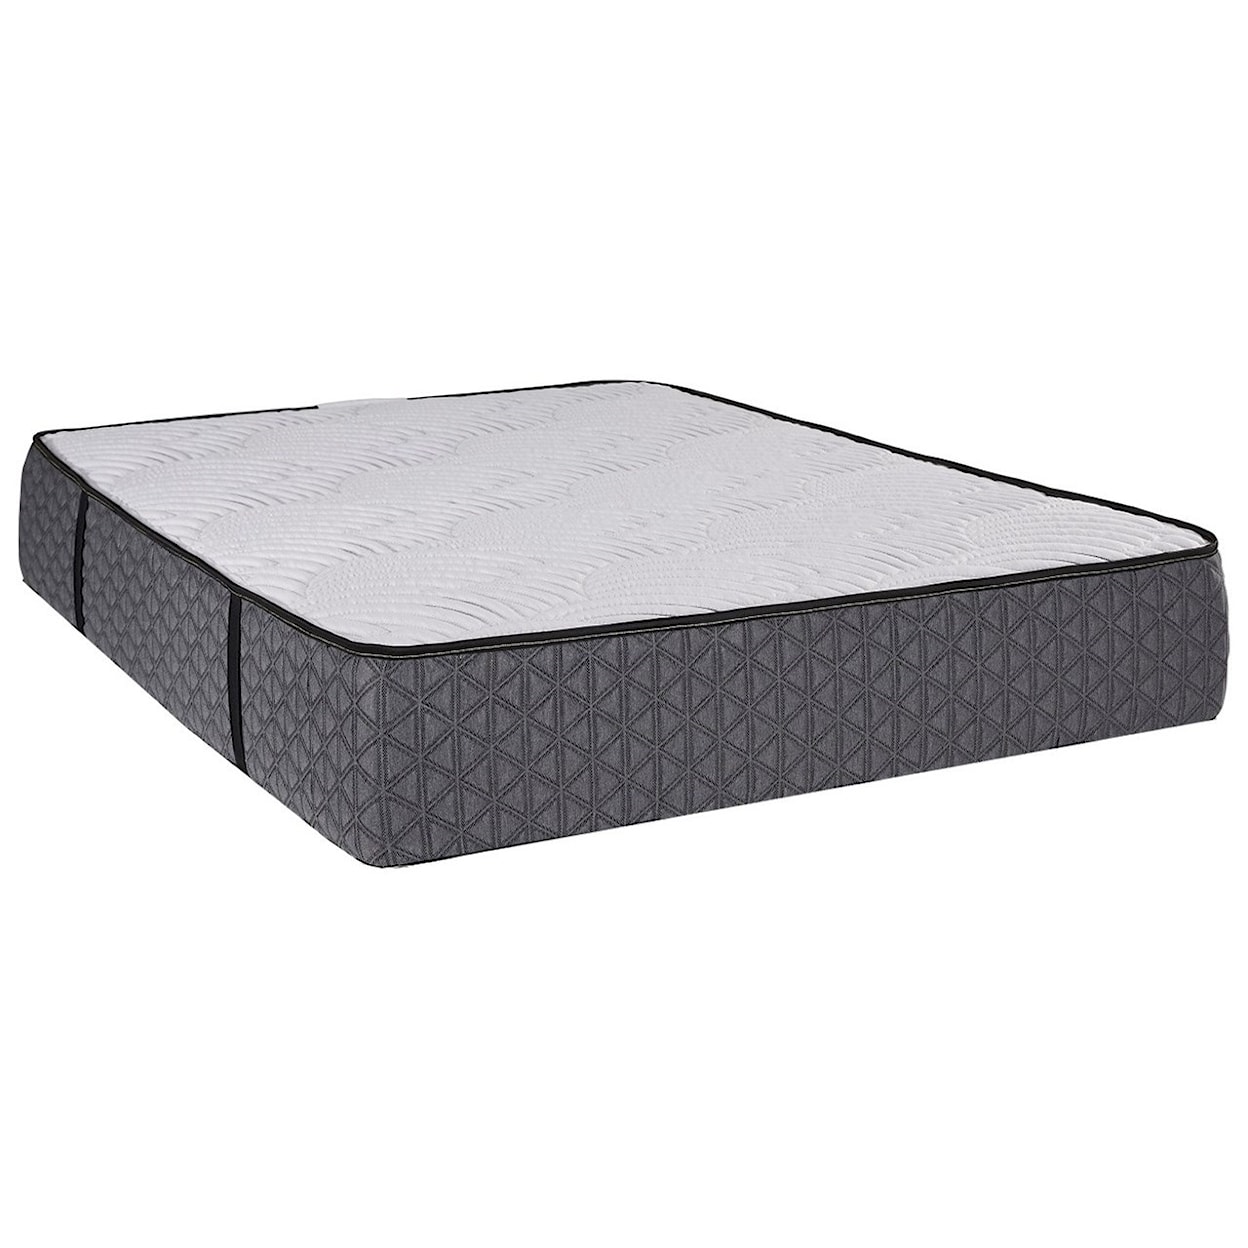 Restonic Aphrodite Firm Twin XL Pocketed Coil Mattress